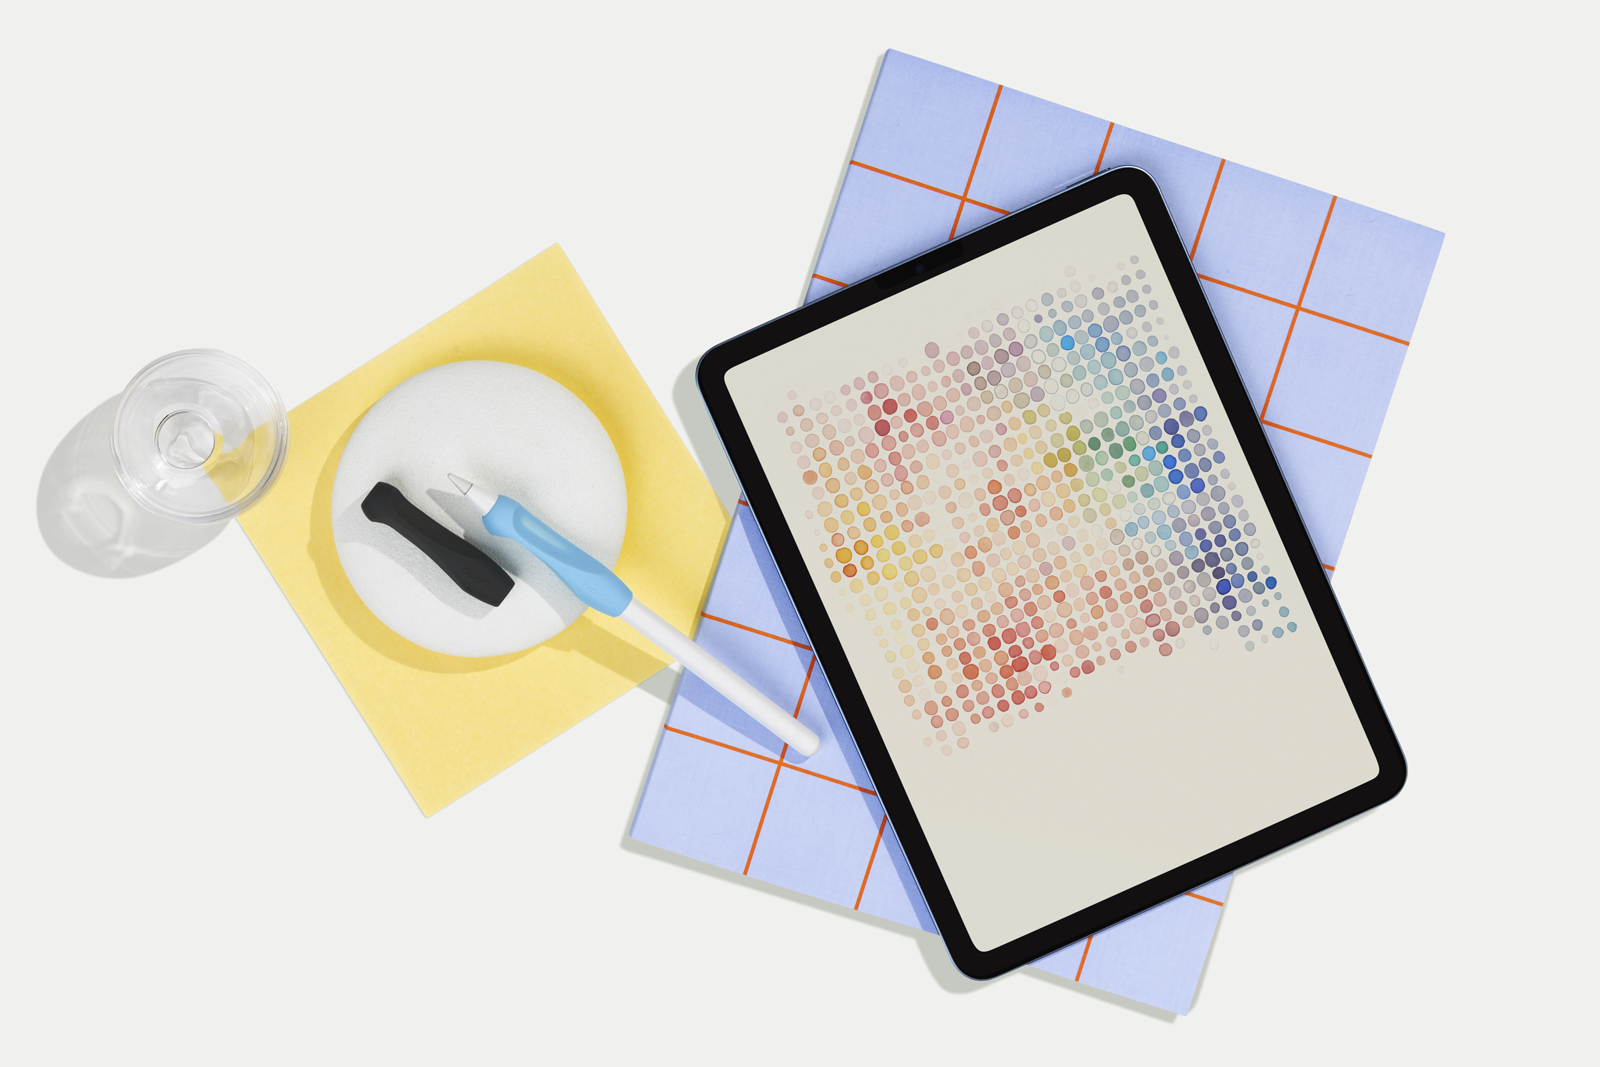 An iPad sits atop a mat with a grid pattern. An Apple Pencil and Paperlike’s Pencil Grips are placed off to the side.